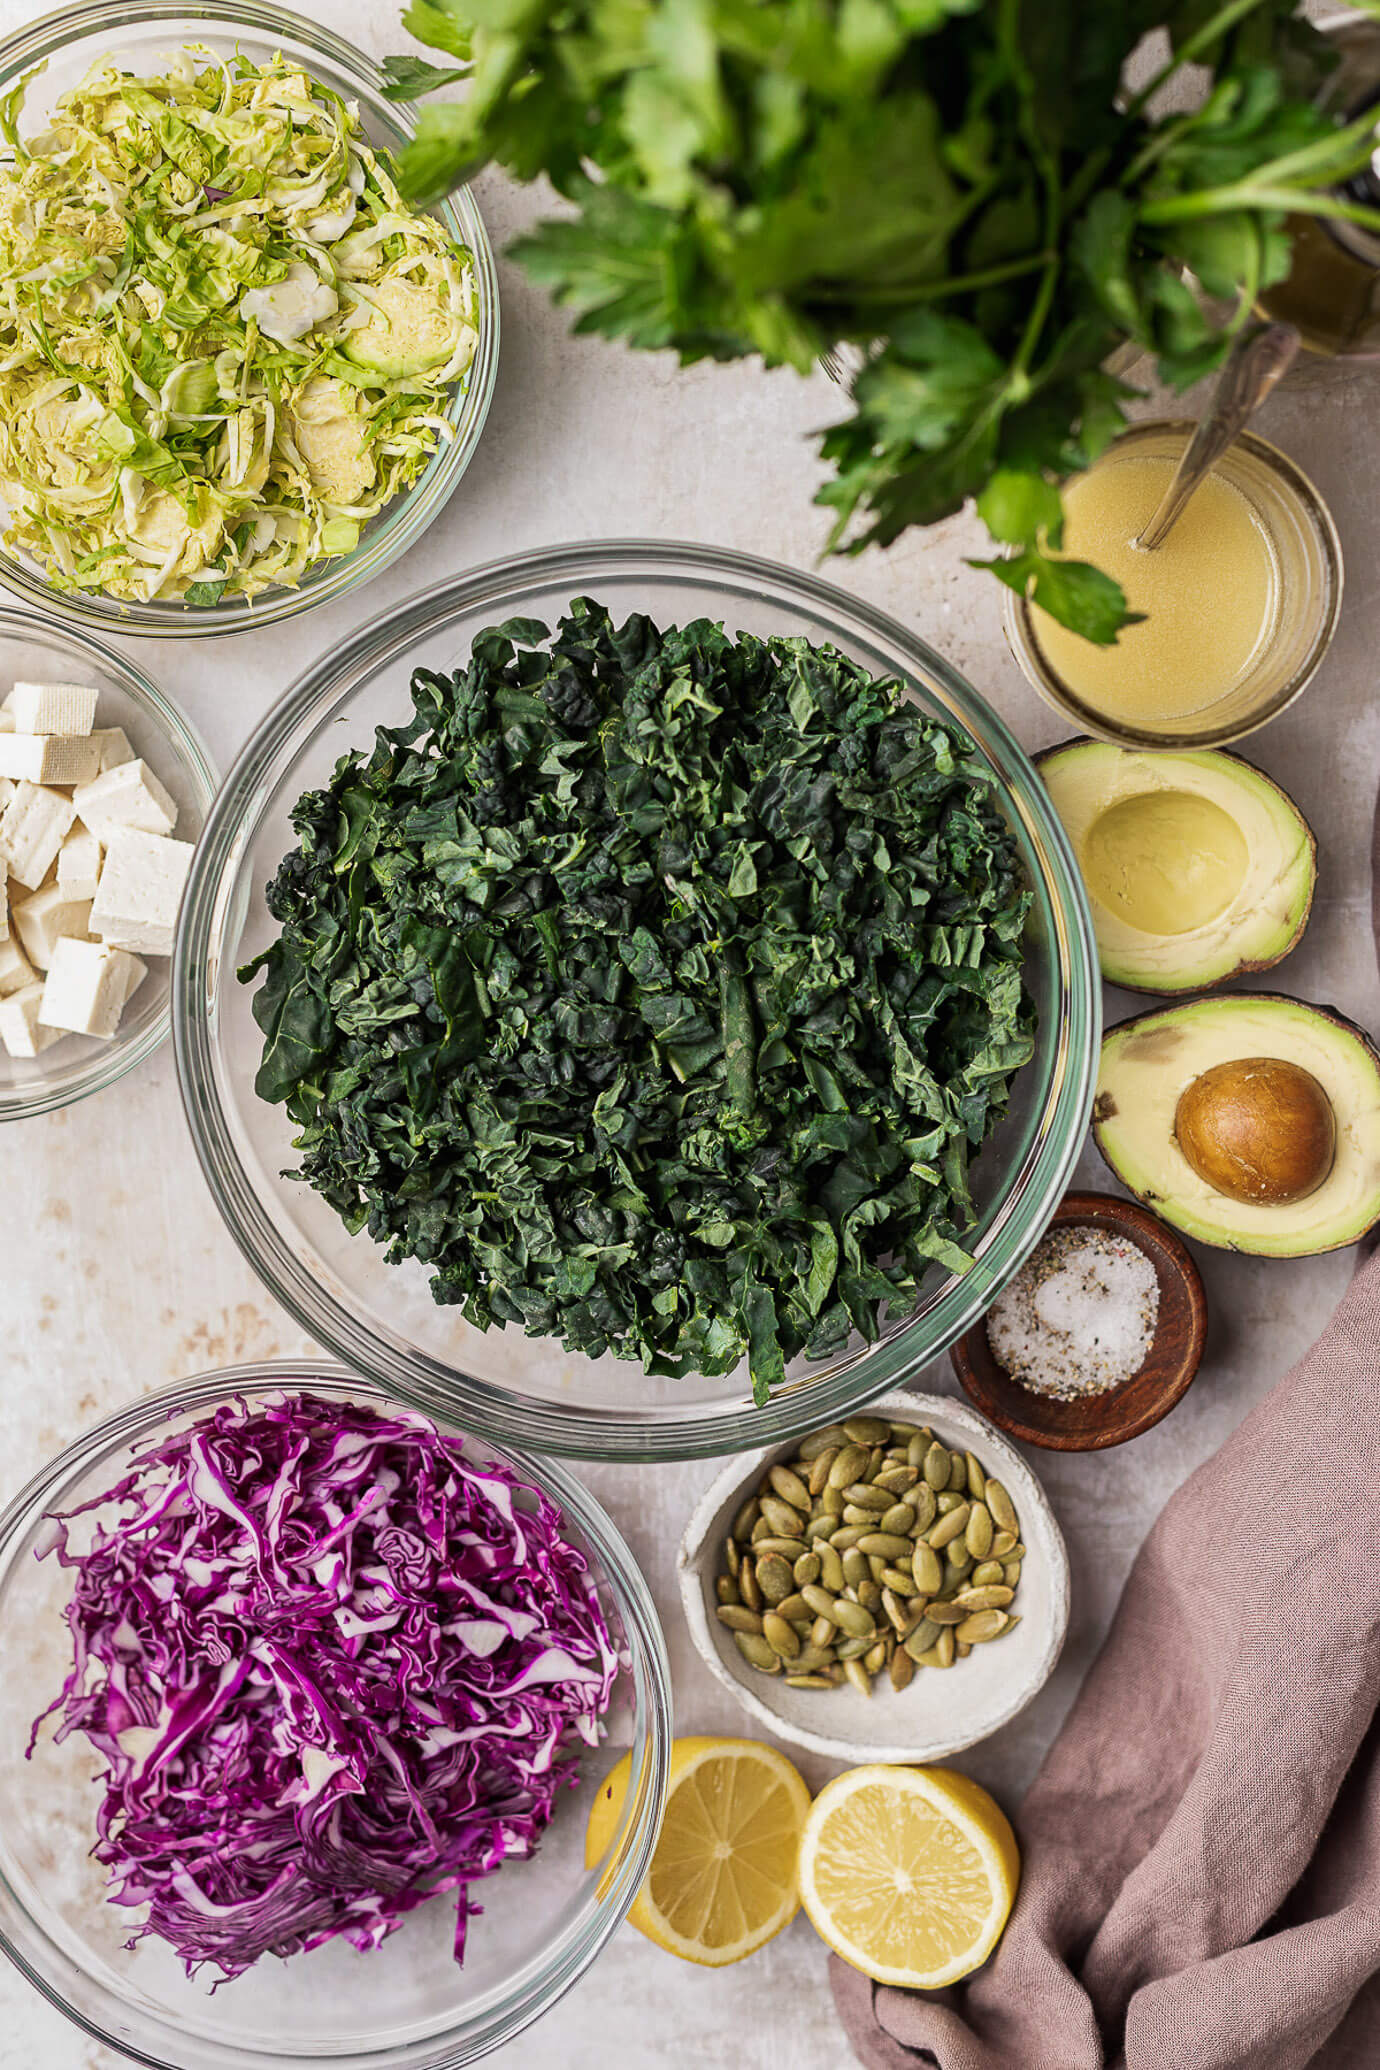 Shredded Kale and Brussels Sprout Salad Ingredients